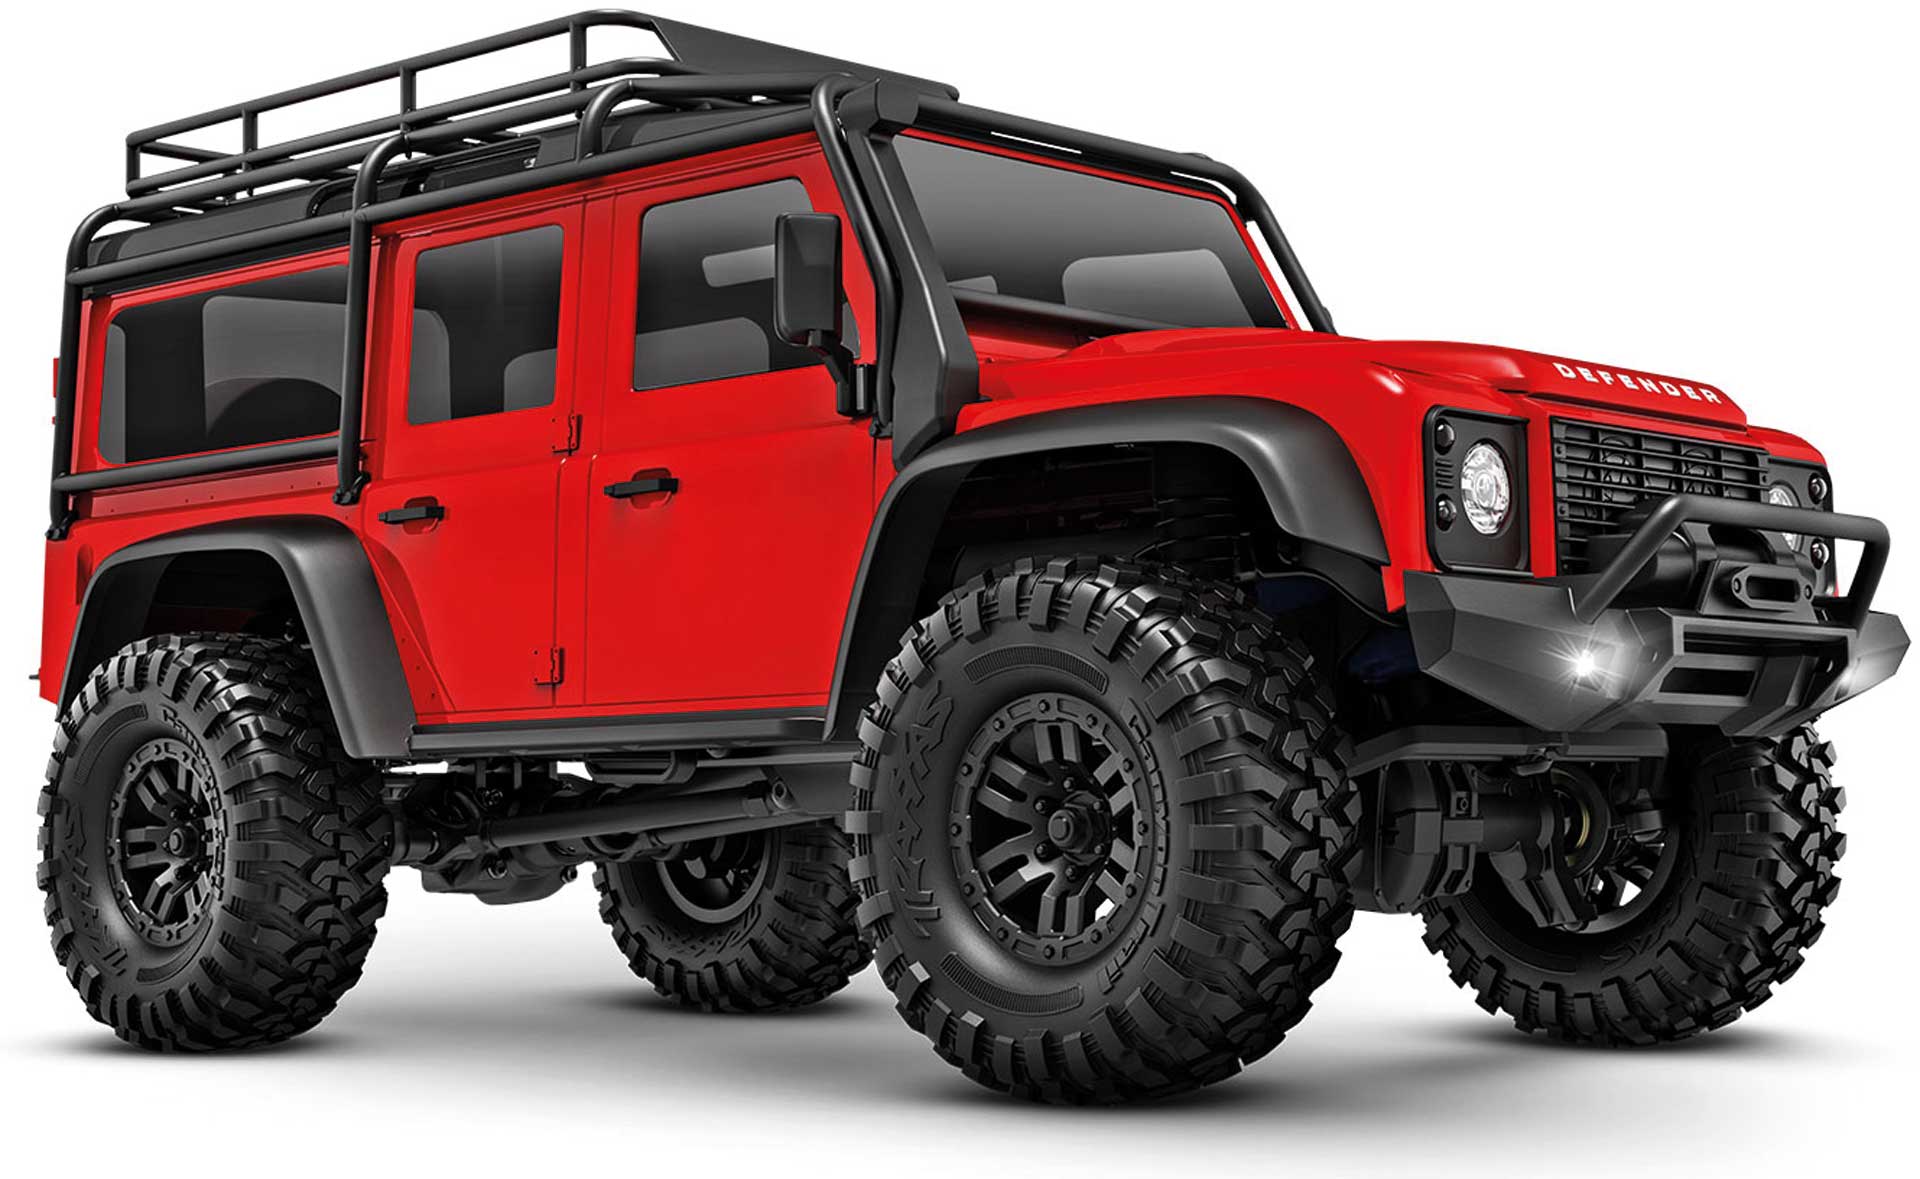 TRAXXAS TRX-4M Land Rover Defender red 1/18 4WD RTR Scale Crawler with batterie/charger